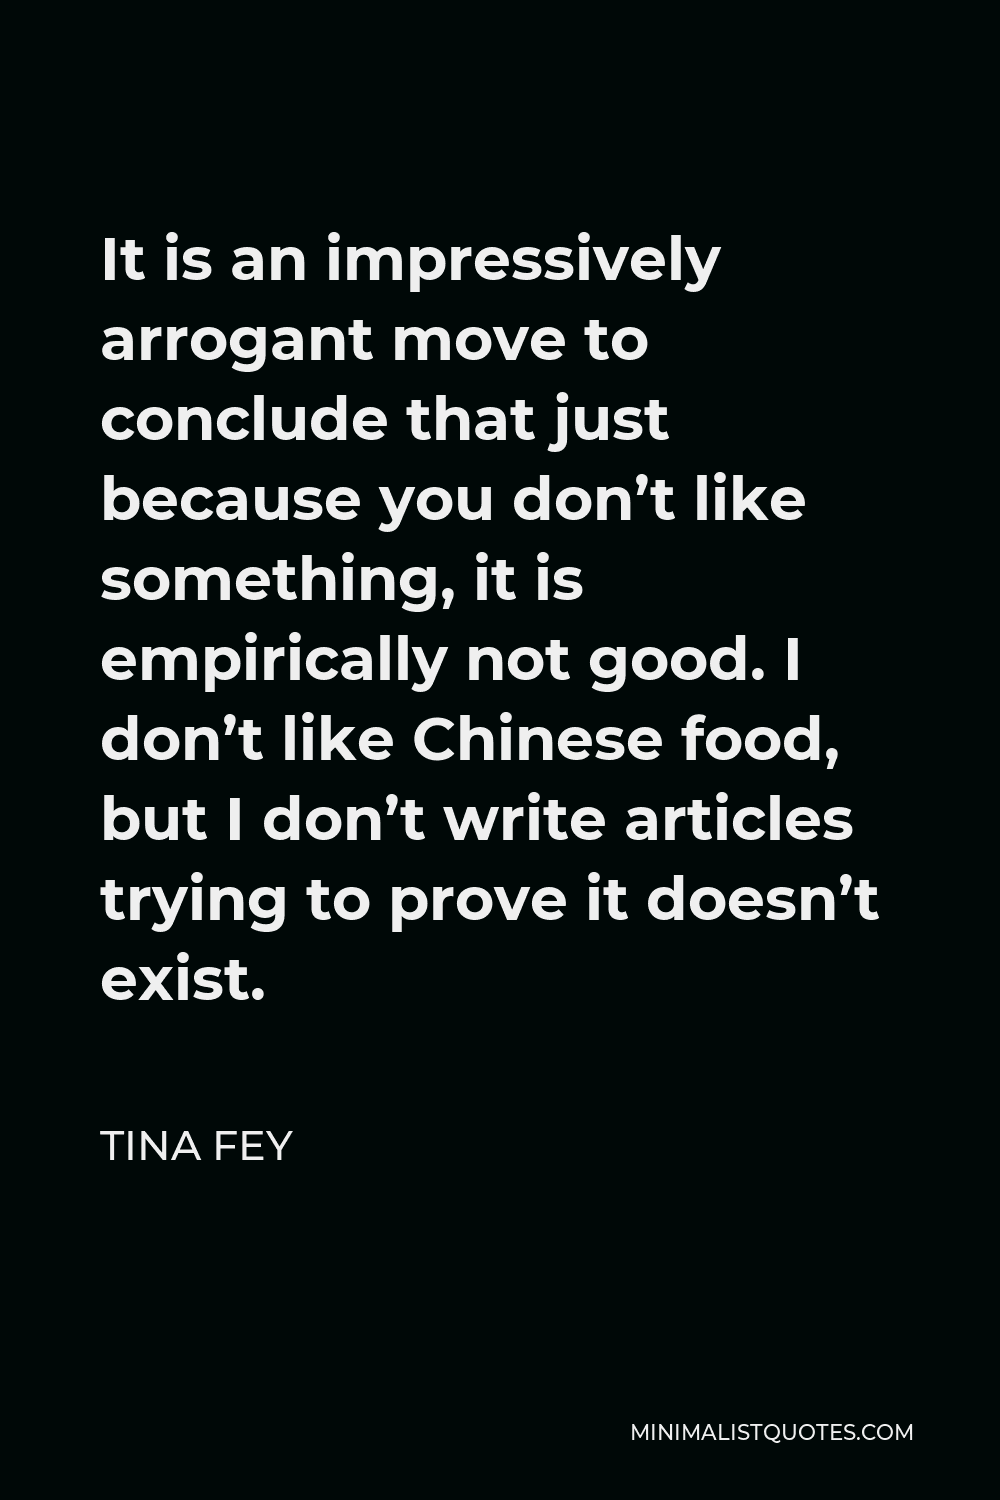 Tina Fey Quote - It is an impressively arrogant move to conclude that just because you don’t like something, it is empirically not good. I don’t like Chinese food, but I don’t write articles trying to prove it doesn’t exist.